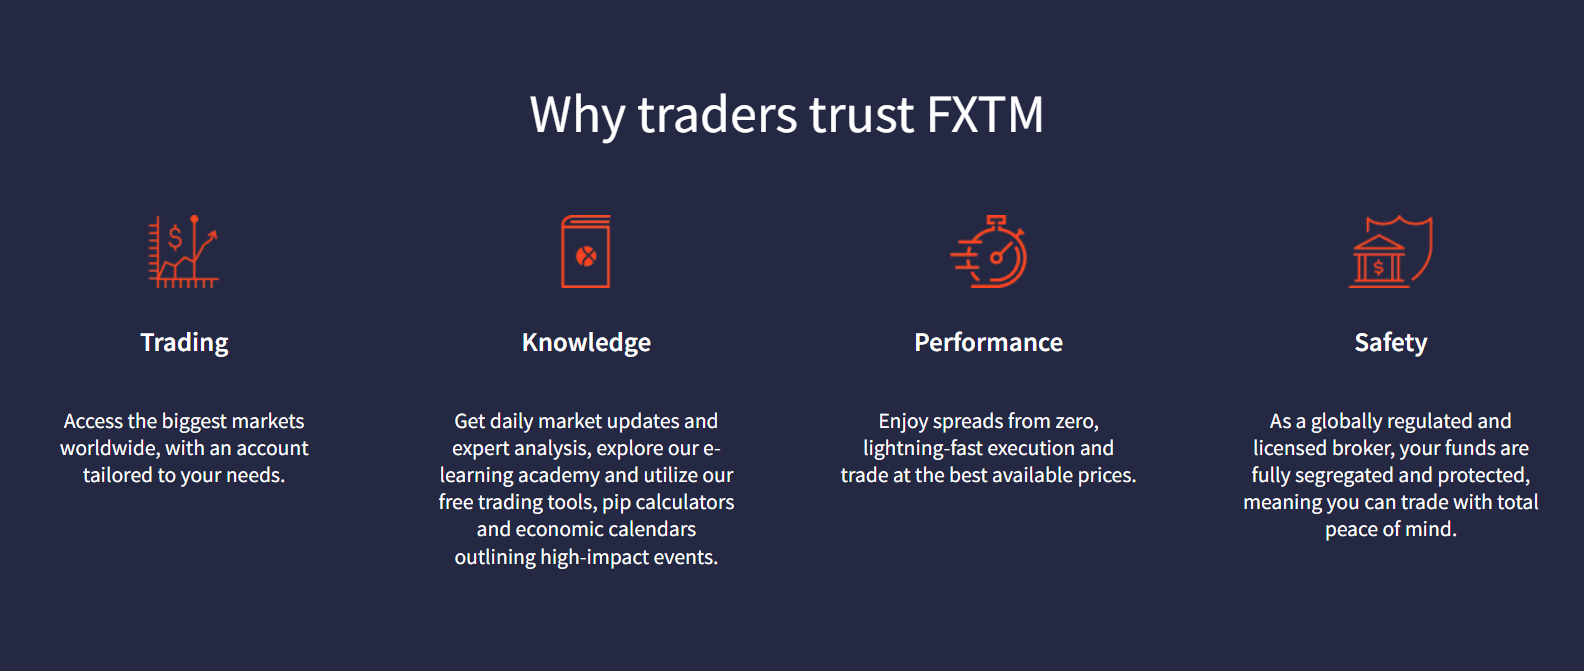 FXTM_Overview